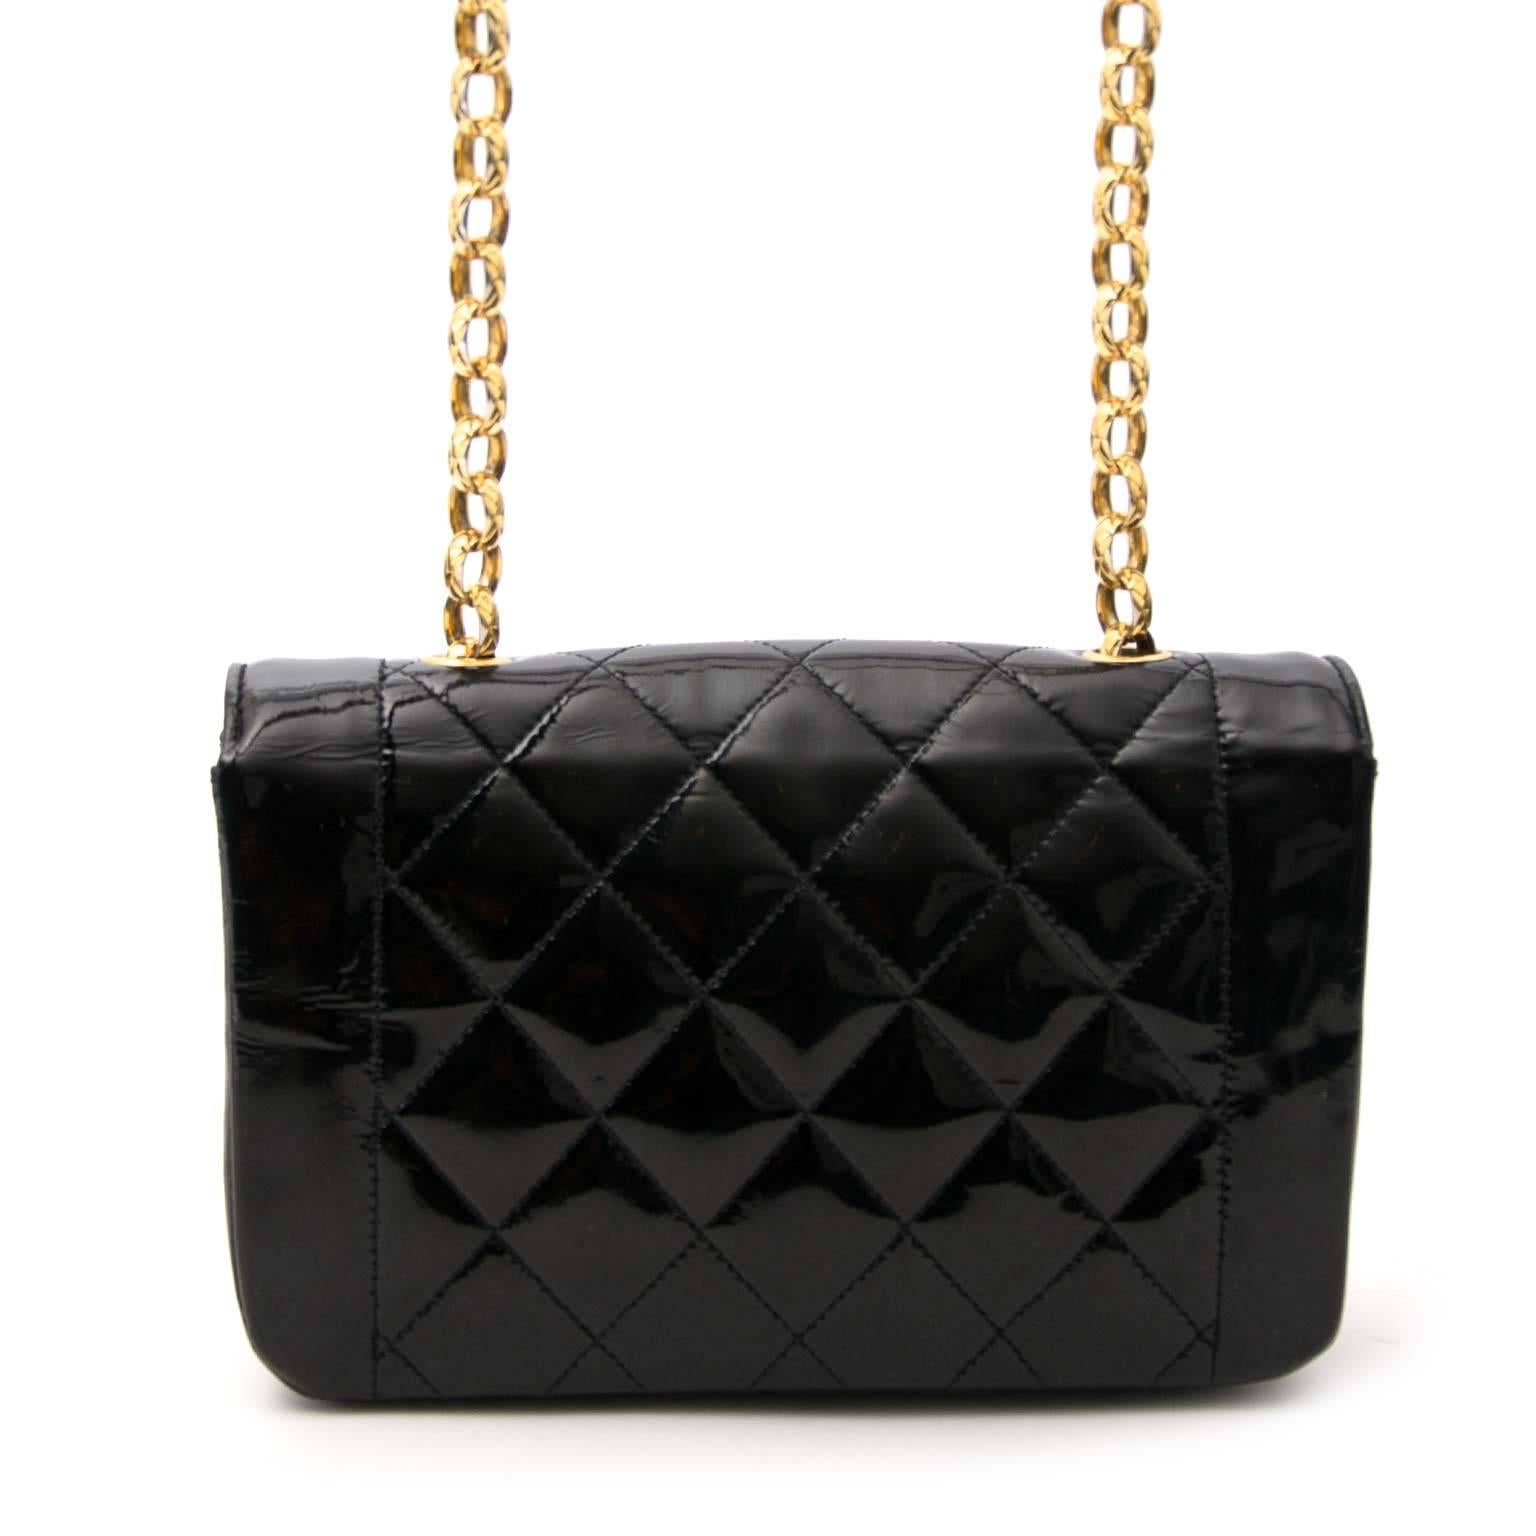 Very Good Preowned Condition

Chanel Black Patent Leather Chain Bag

Beauty knows no age! This gorgeous patent leather bag by Chanel is the perfect example of a timeless classic. It's quilted detailing on the front and back, shiny black upper and